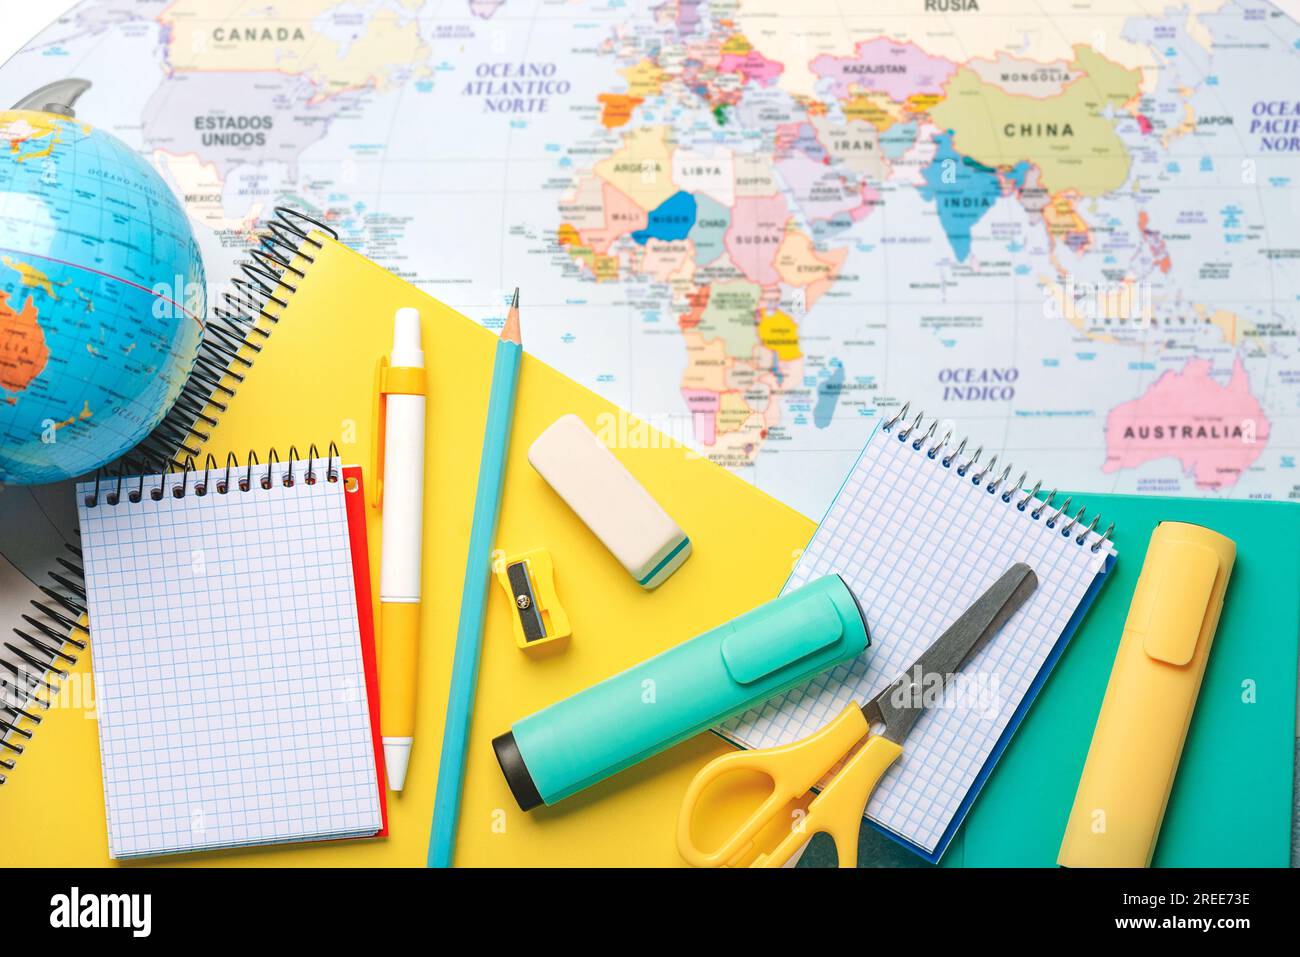 Top view of notebooks,school supplies and earth globe on a world map. Back to school concept Stock Photo